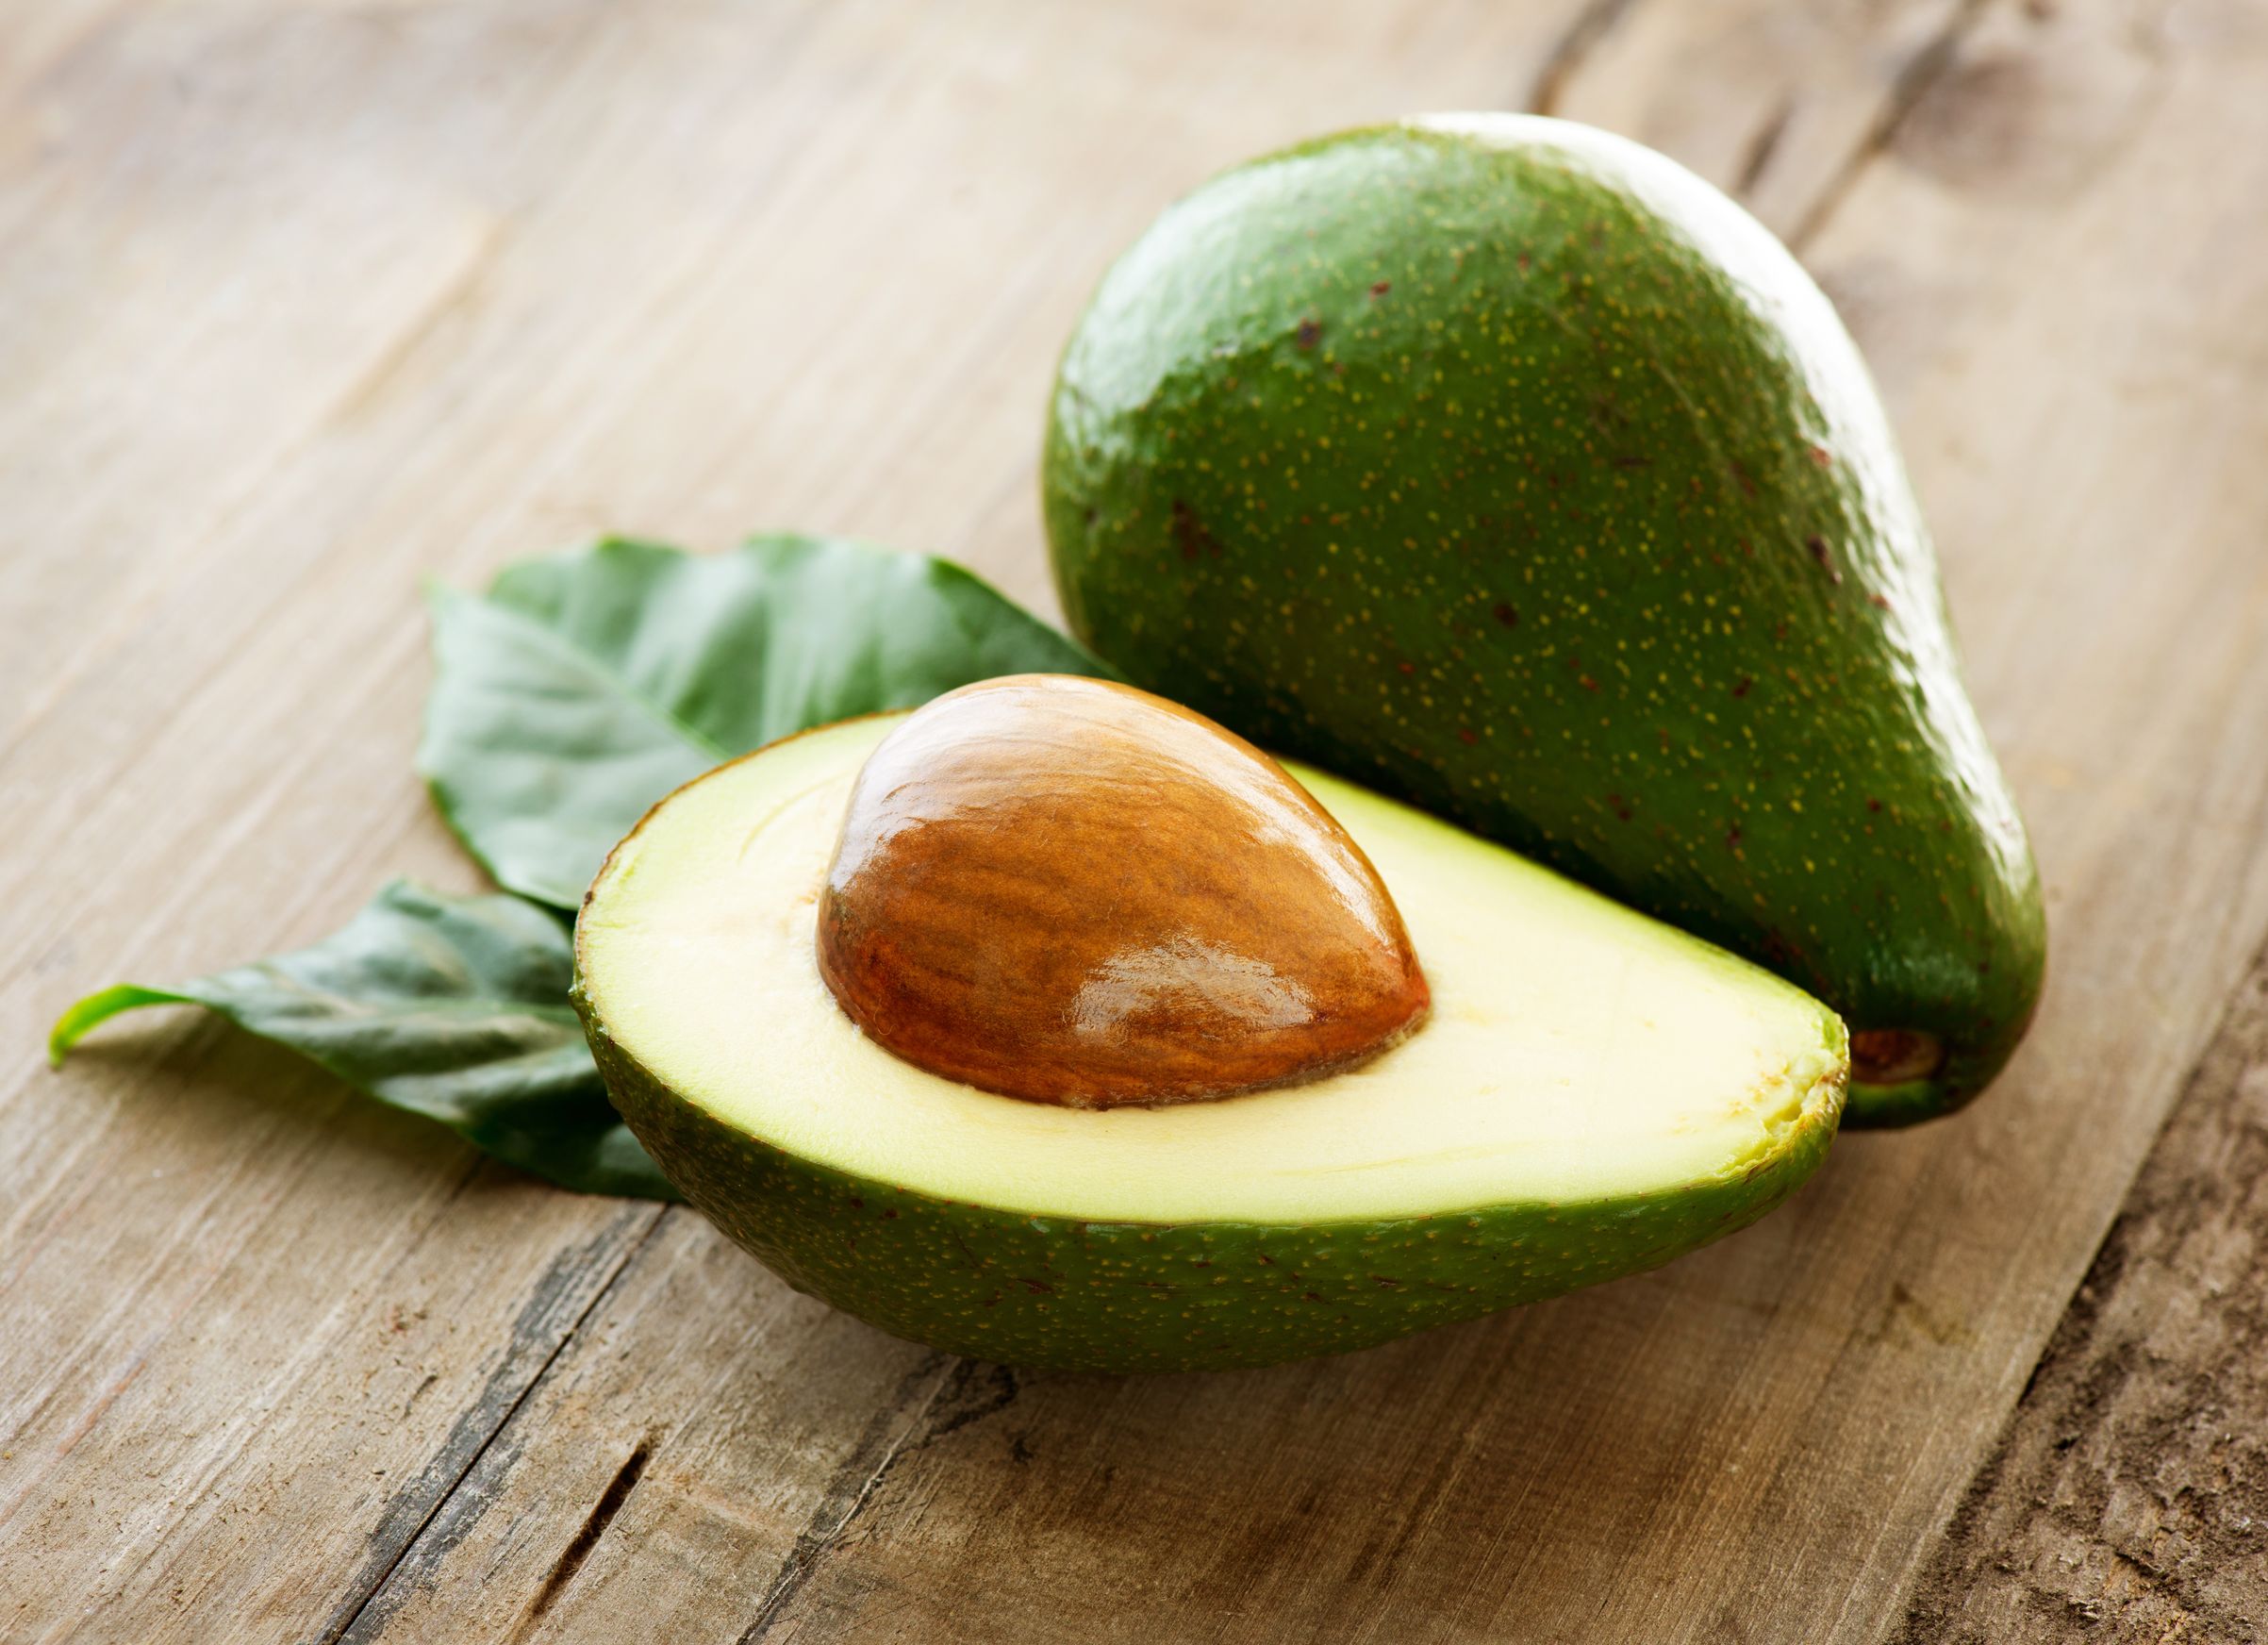 Keep your pet away from avocados